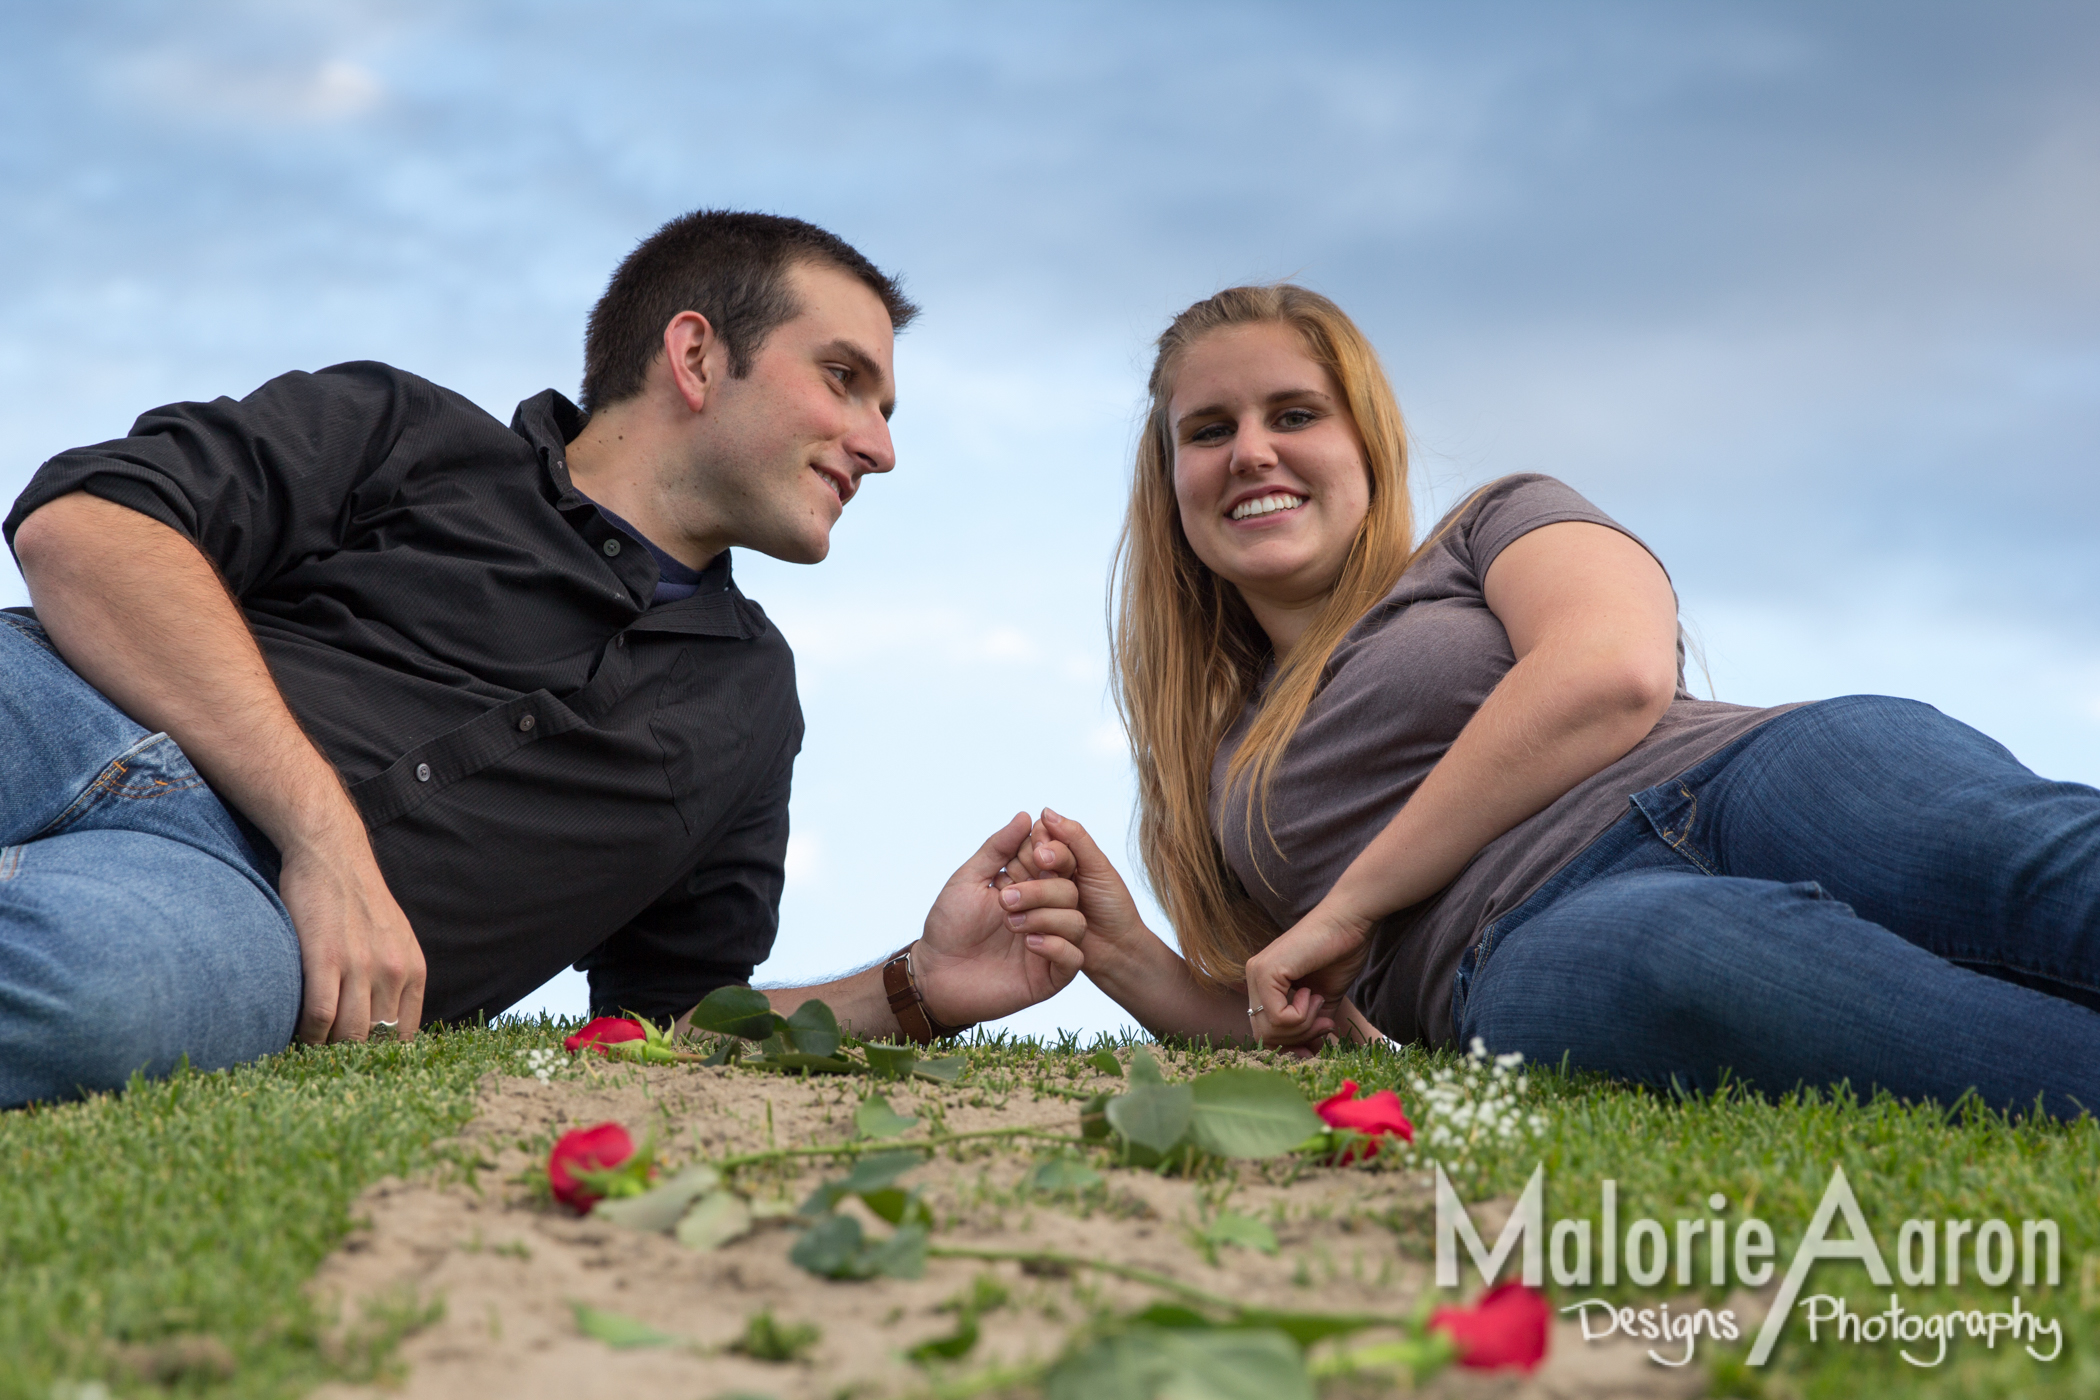 MalorieAaron, photography, Rexburg, wedding, proposal, LDS, temple, popping-the-question